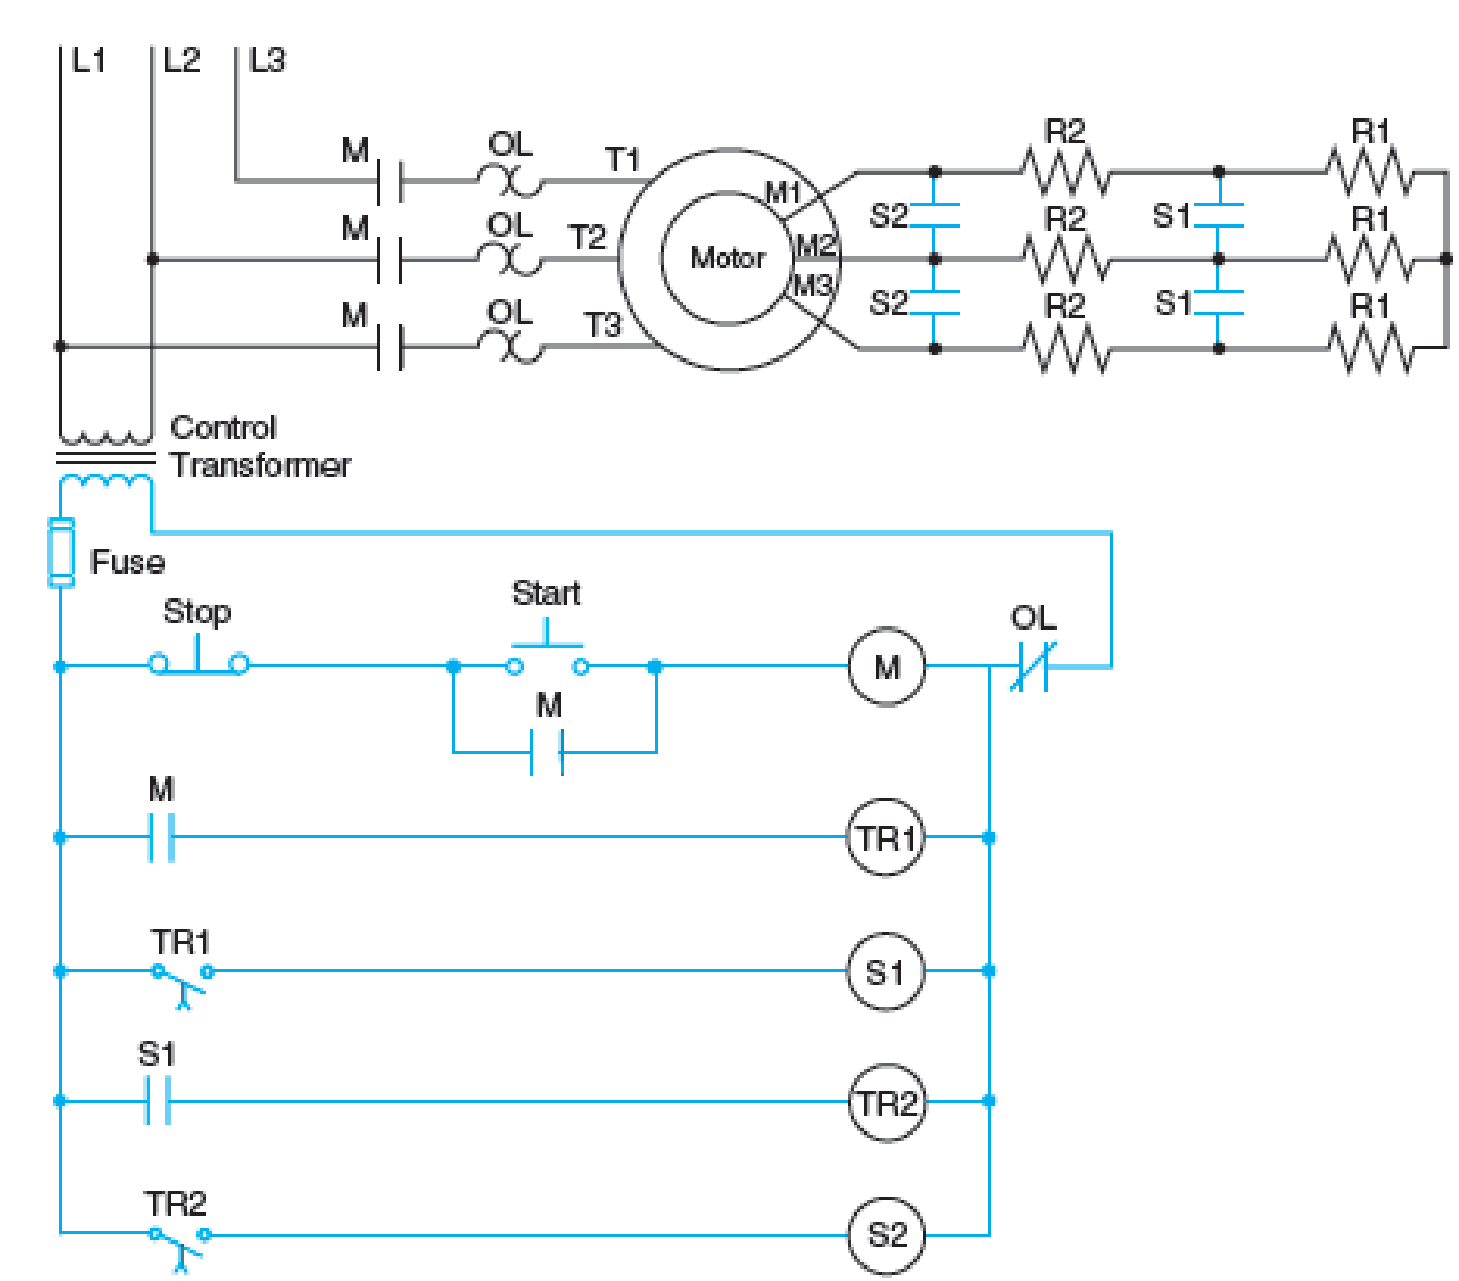 Chapter 36, Problem 4SQ, If one of the secondary resistor contacts (S2) fails in Figure 361, what will happen? Fig. 361 